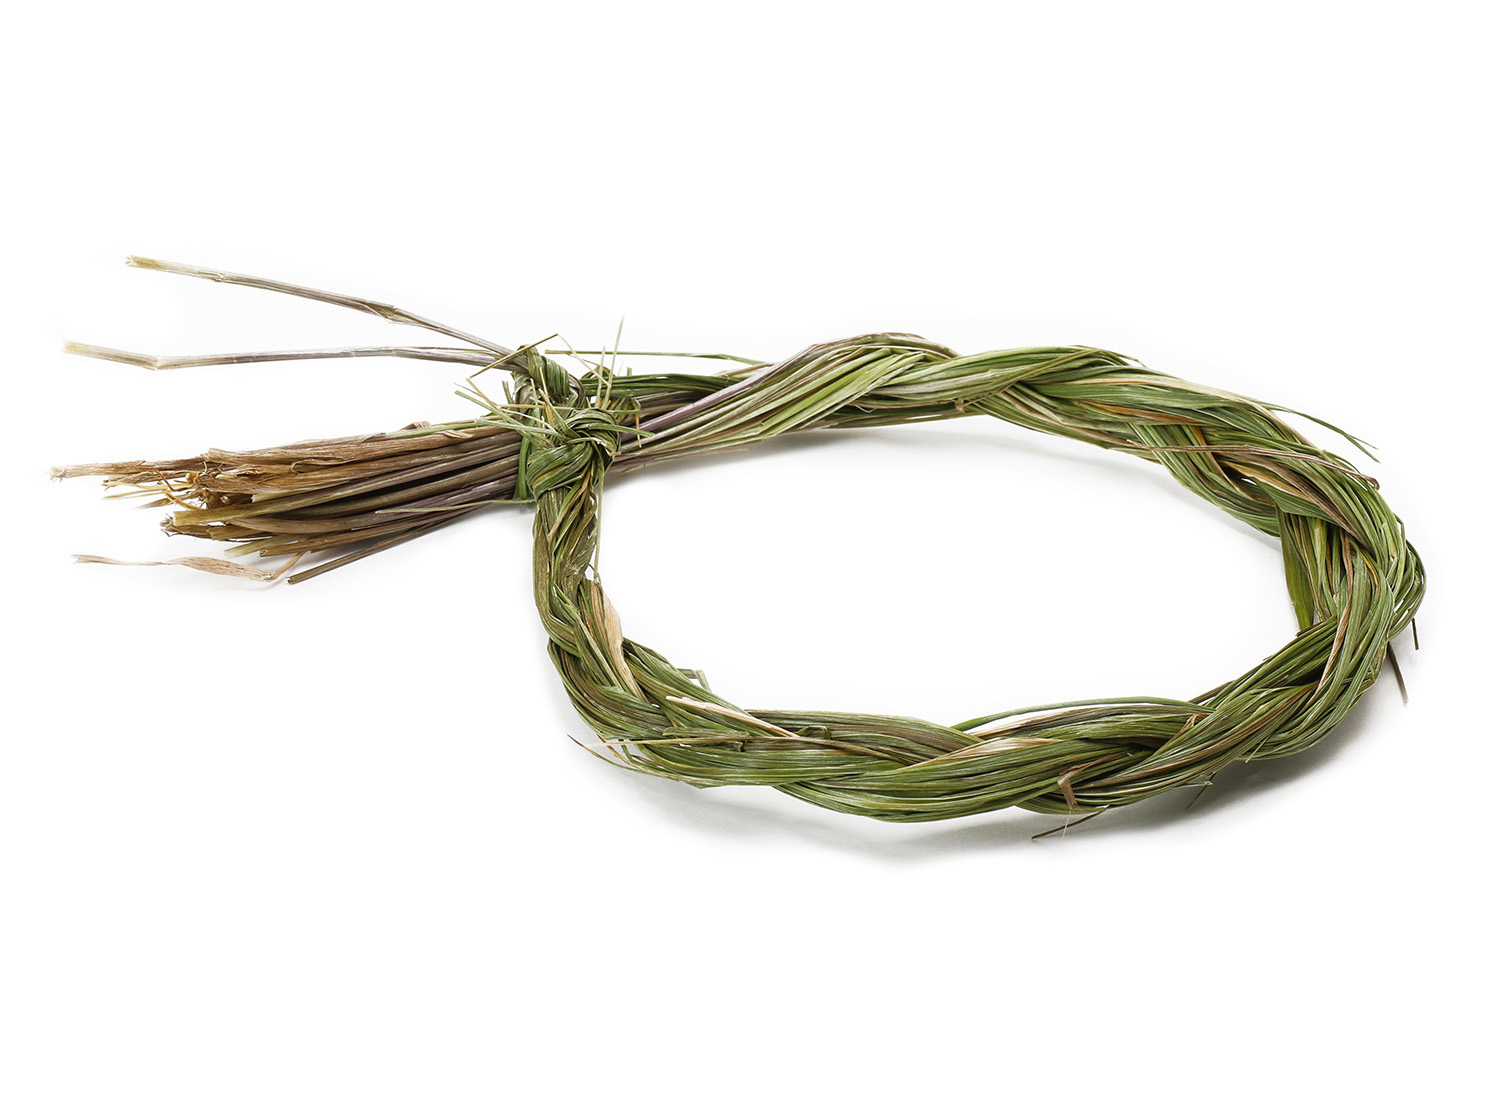 Sweetgrass (Braid) - SW Herb Shop and Gathering Place